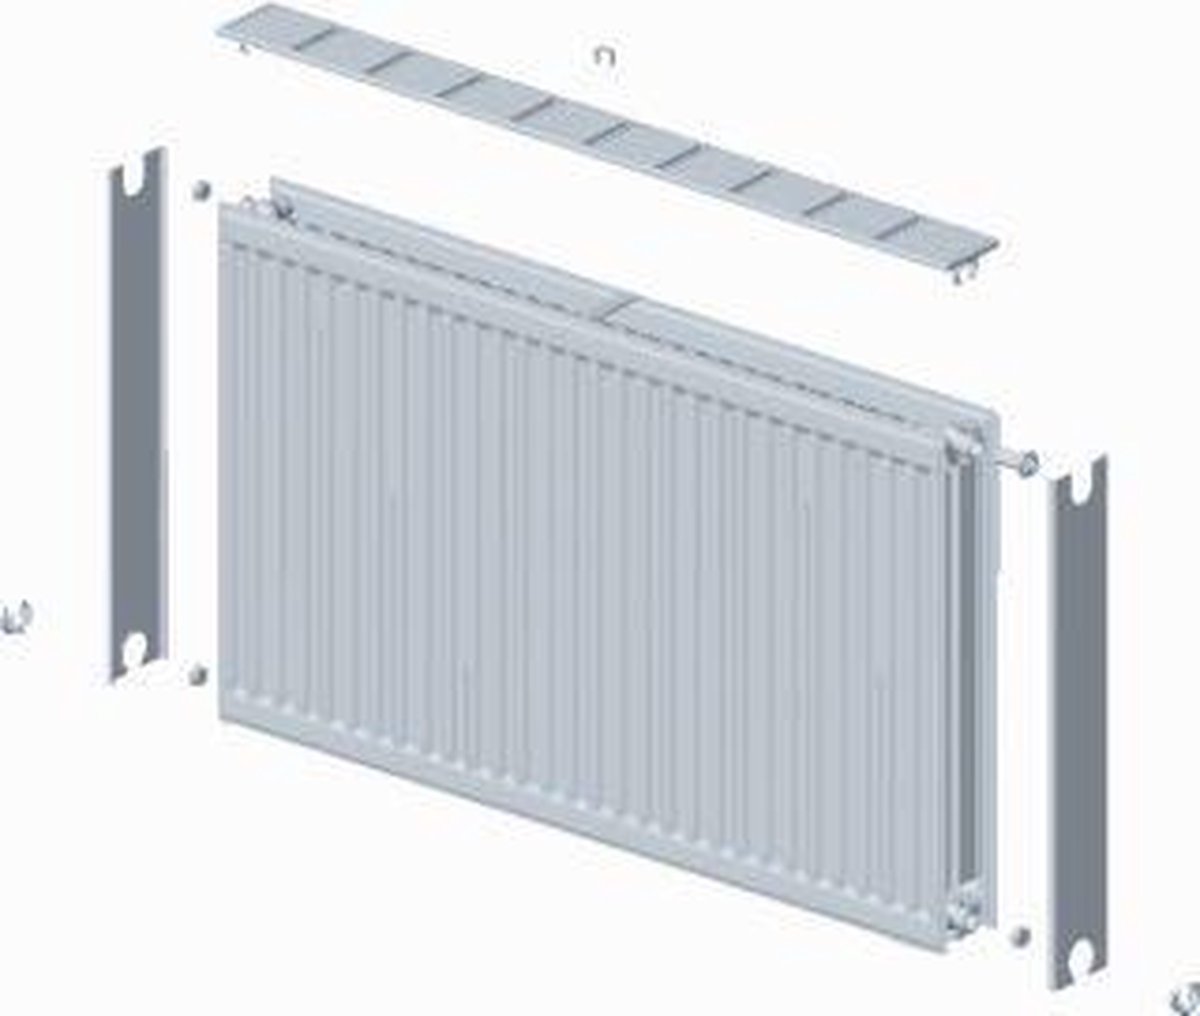 Stelrad paneelradiator Novello, staal, wit, (hxlxd) 400x1800x100mm, 22